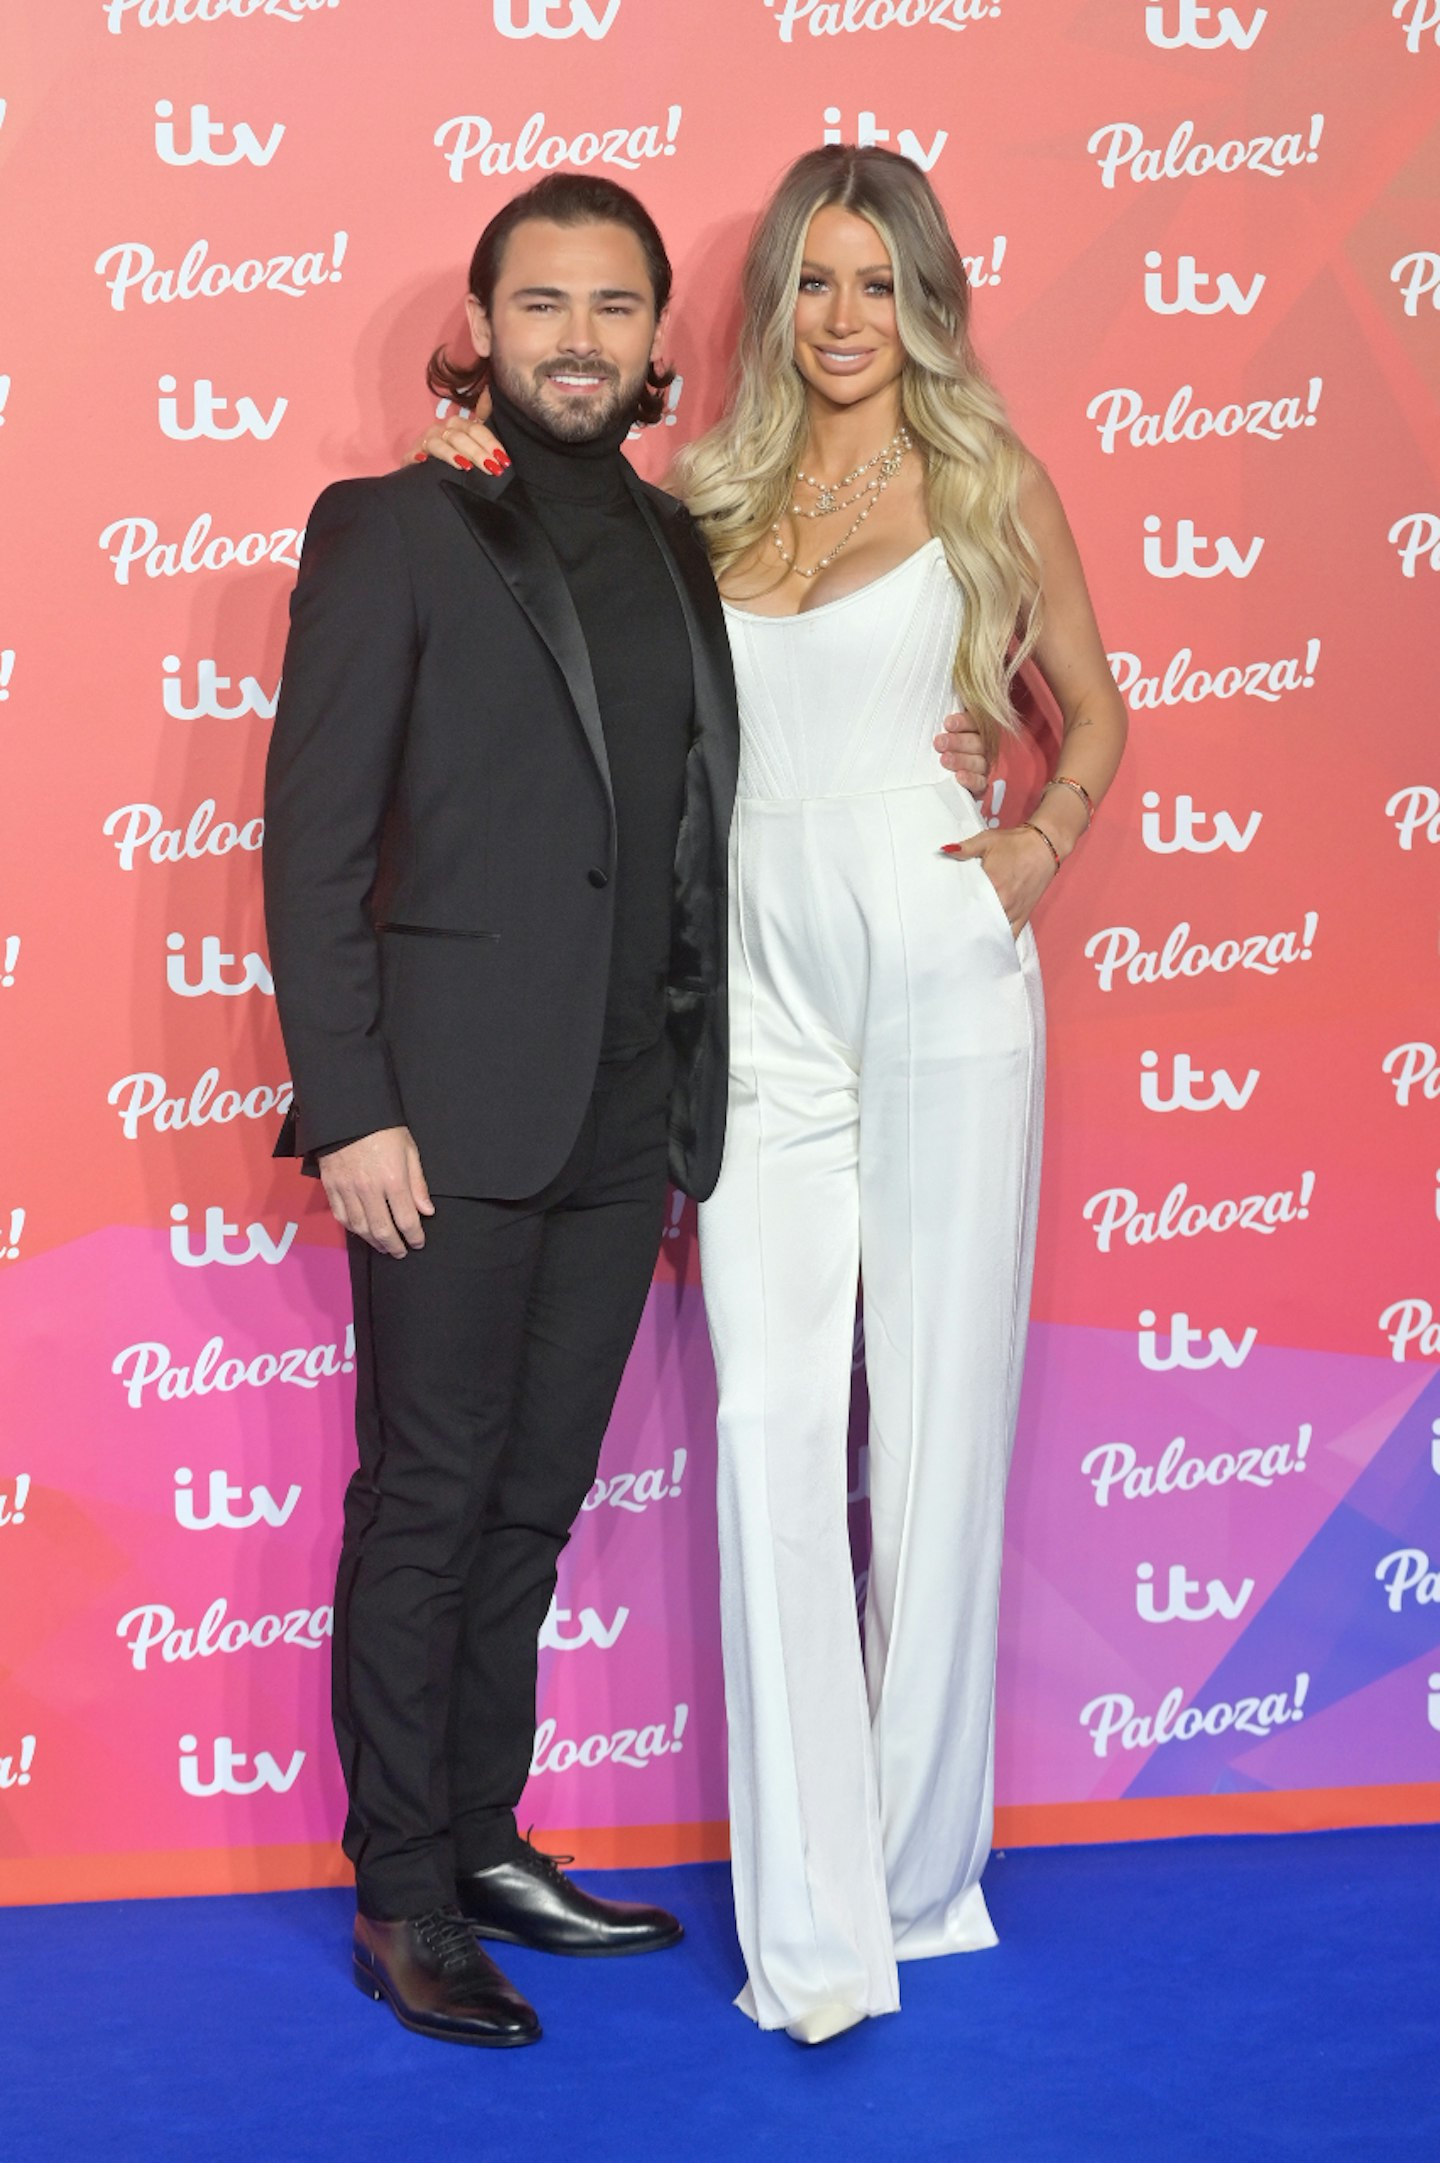 Olivia Attwood and Bradley Dack on the red carpet at the ITV Palooza